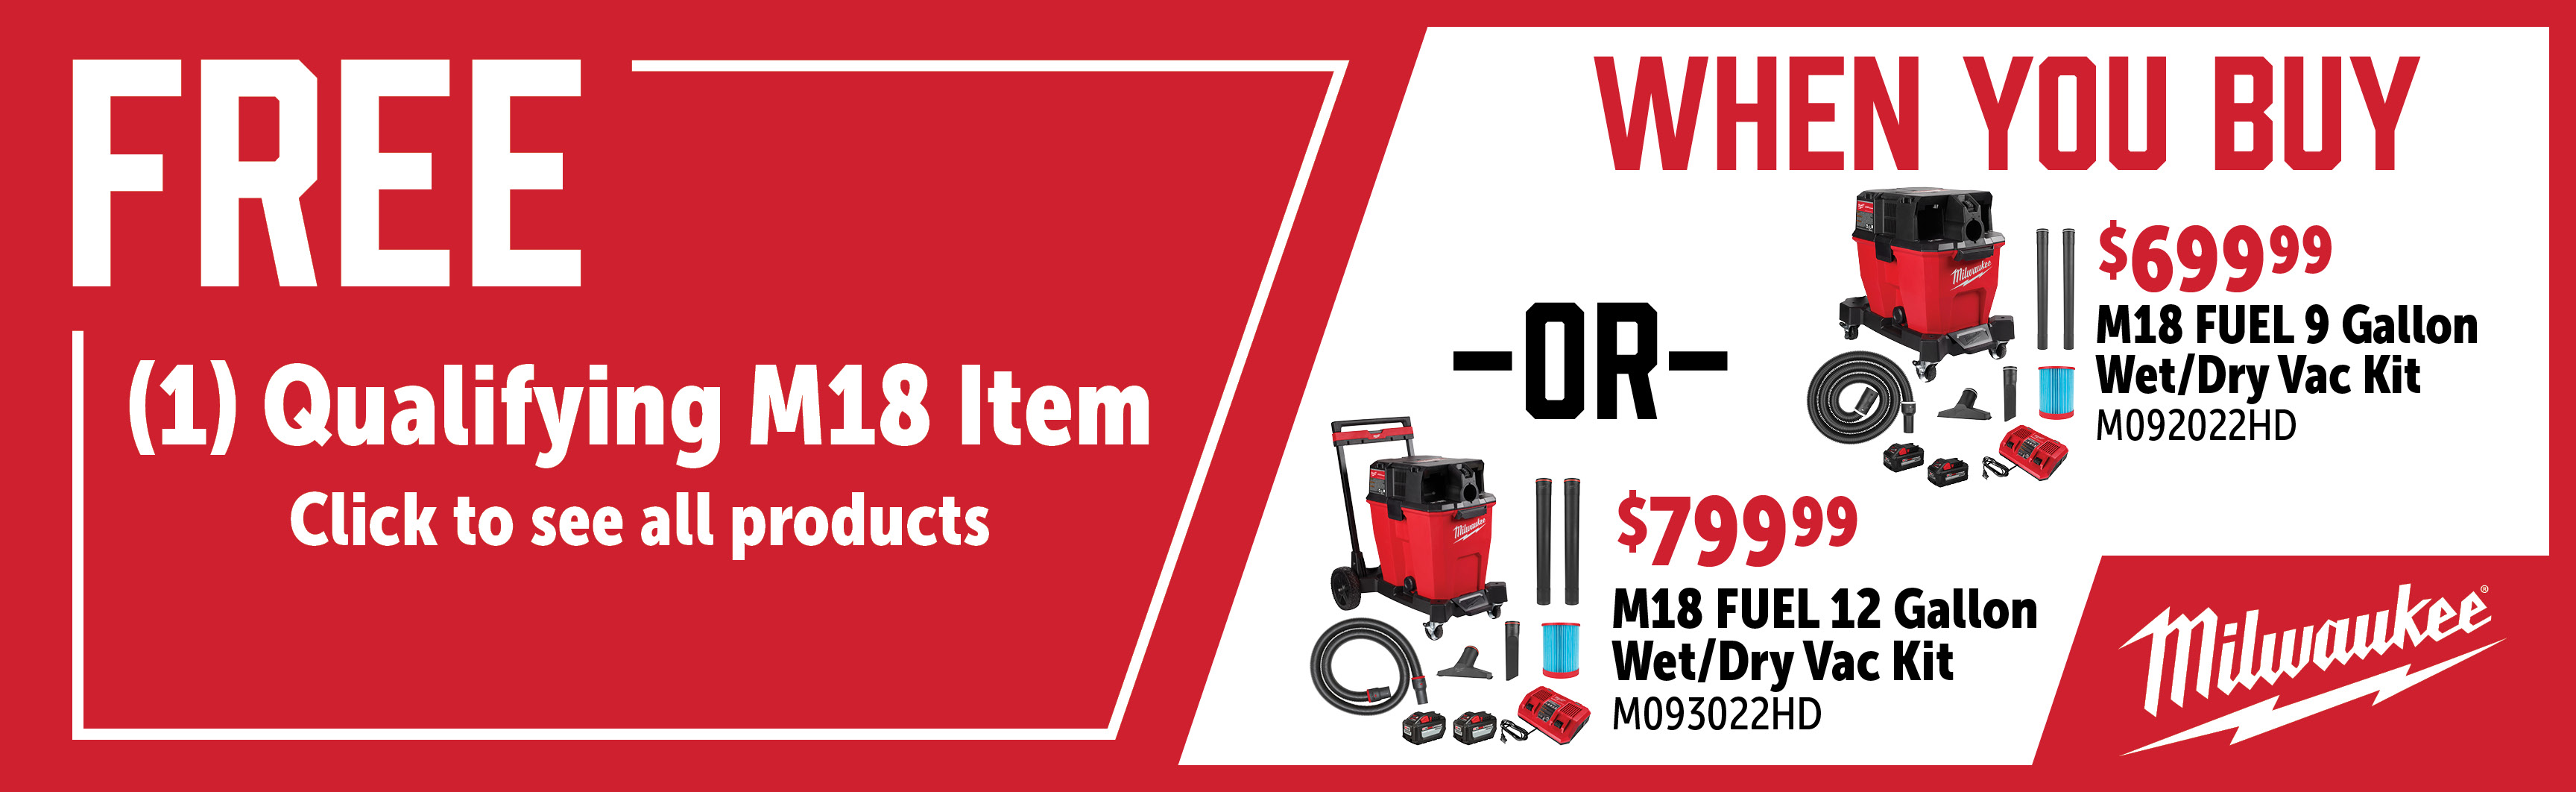 Milwaukee Feb-Apr: Buy an M092022HD or M093022HD and Get a Qualifying FREE Item